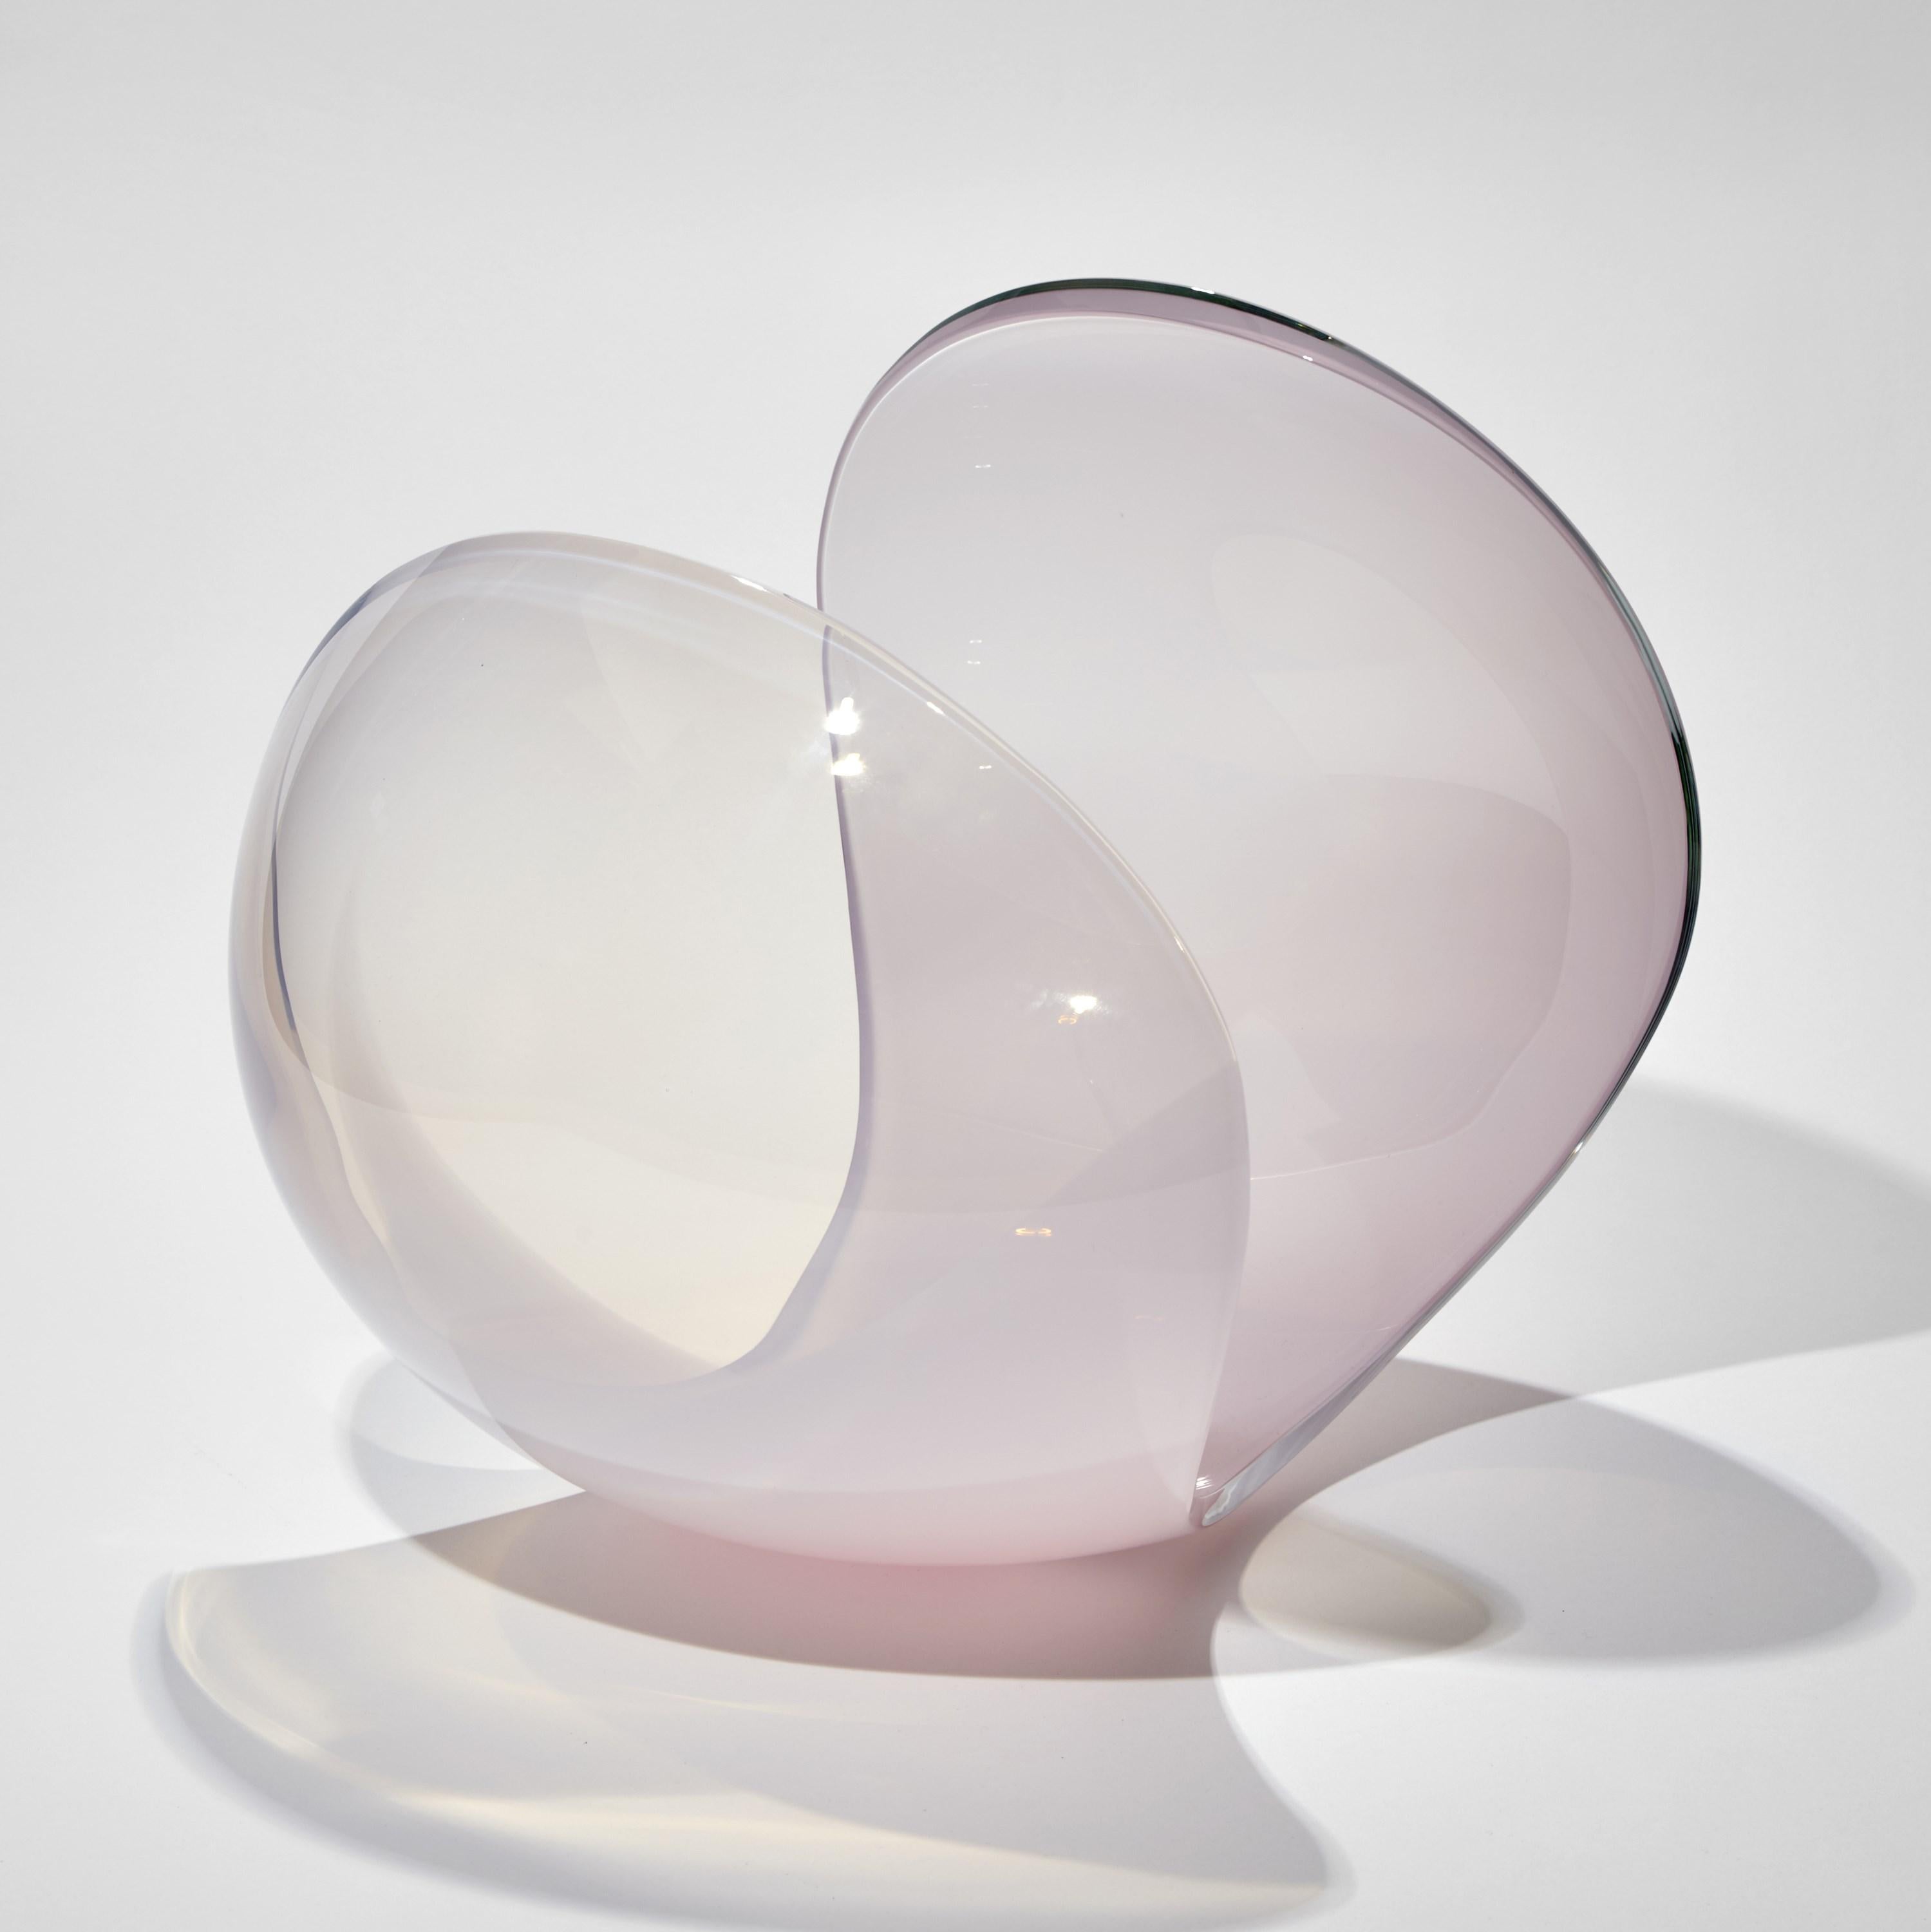 'Planet in Soft Pink' is a unique glass sculptural artwork and centerpiece by the Swedish artist Lena Bergström. This piece is from an ongoing collection of works called the Planets which the artist has revisited several times throughout her